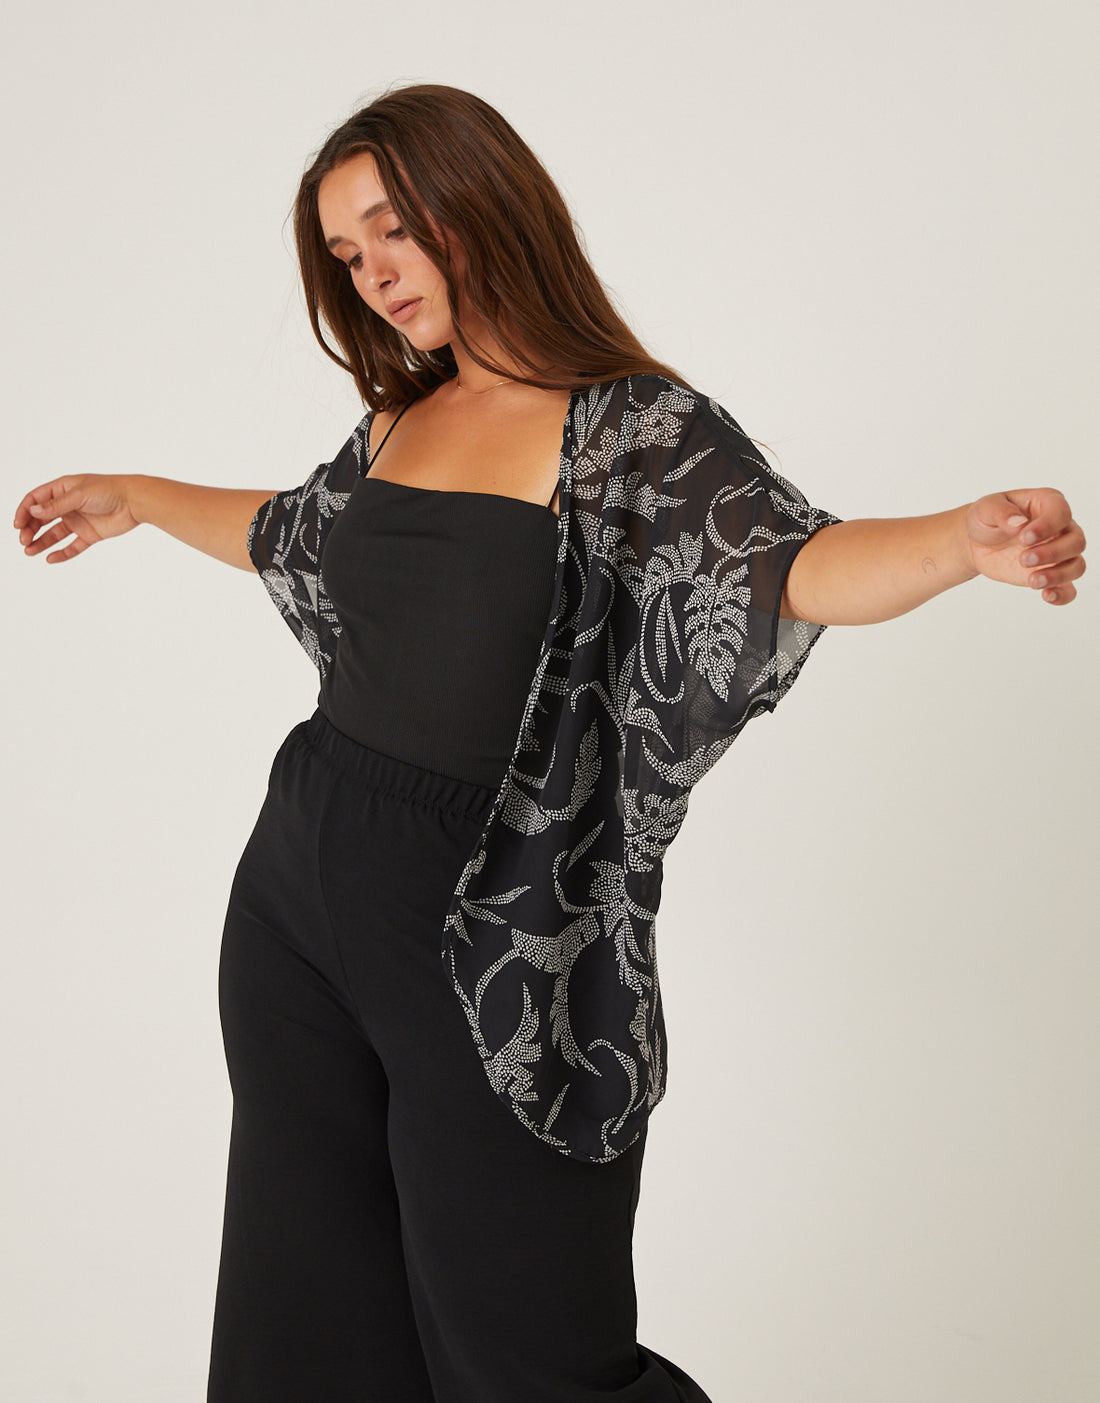 Curve Dotted Leaf Chiffon Cardigan Plus Size Outerwear -2020AVE